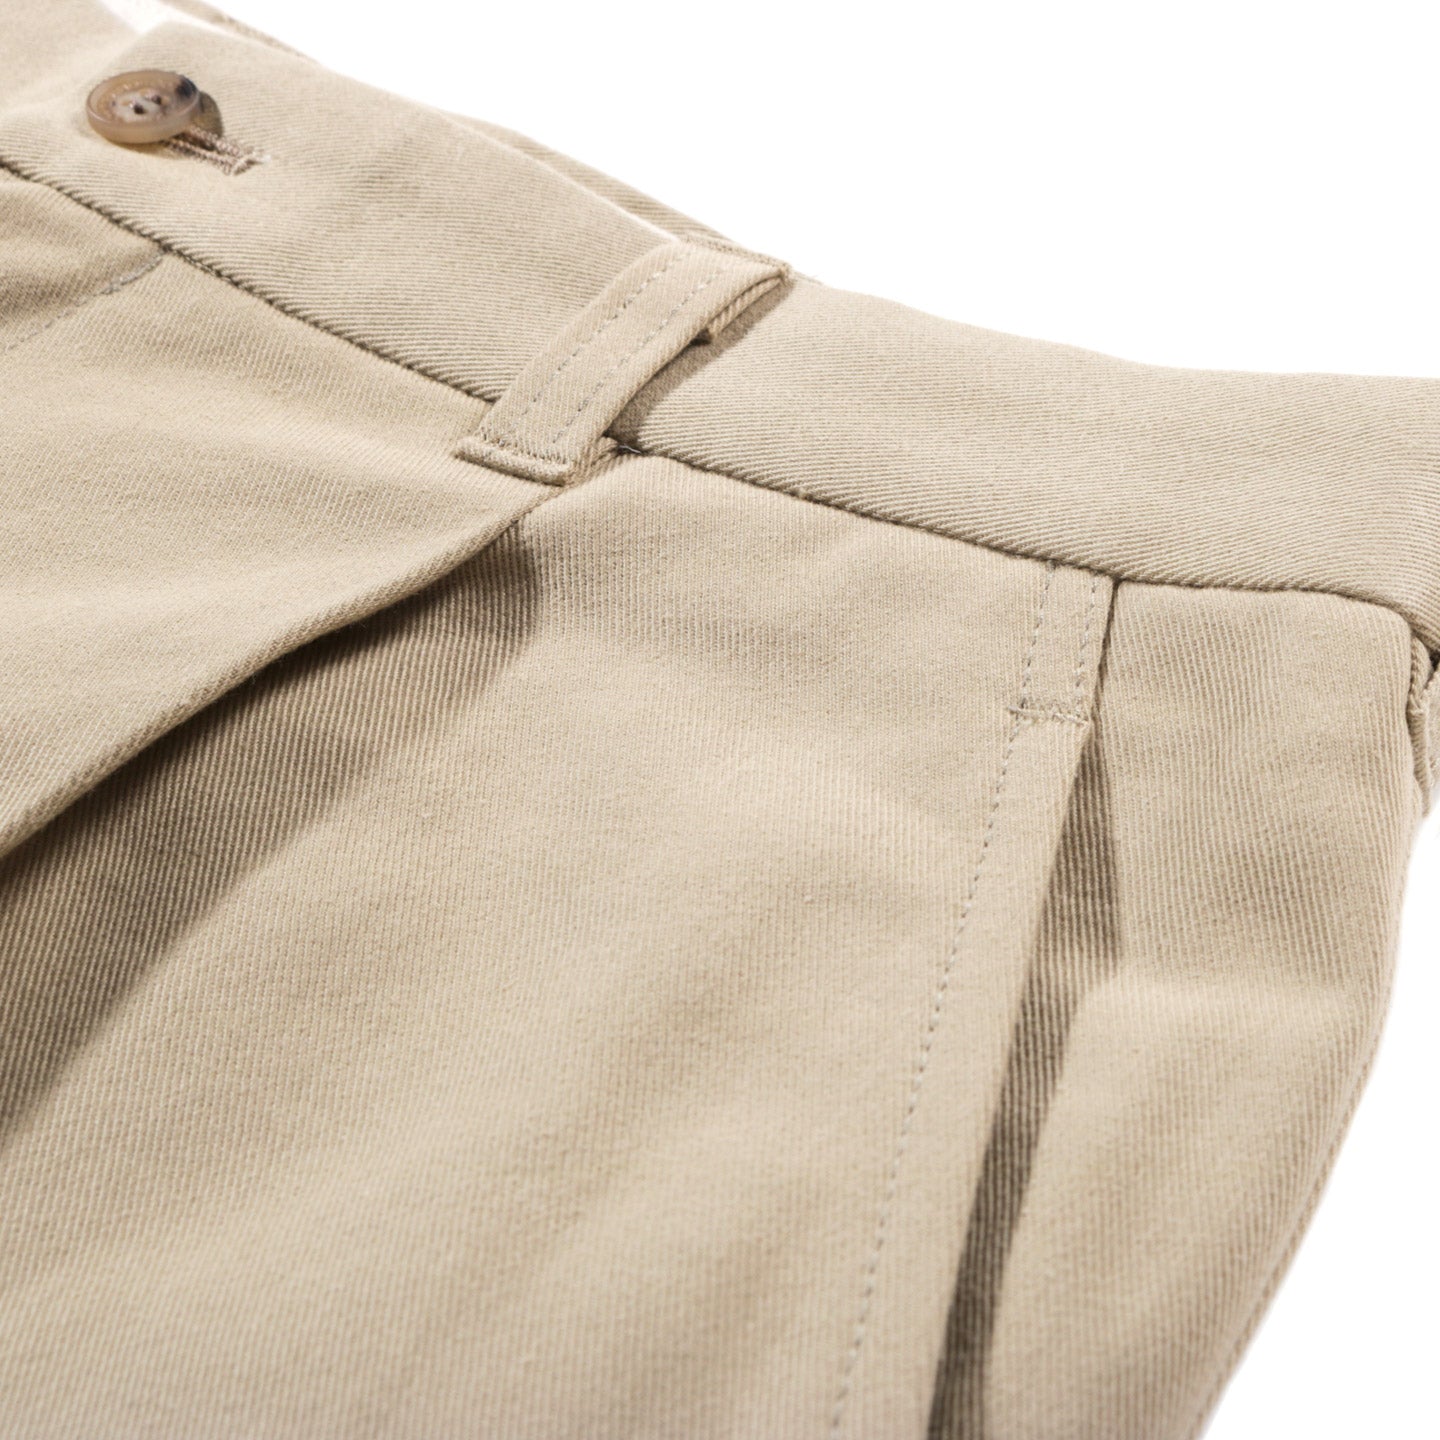 COMME DES GARCONS HOMME P003 WIDE PLEATED CHINO PANT BEIGE